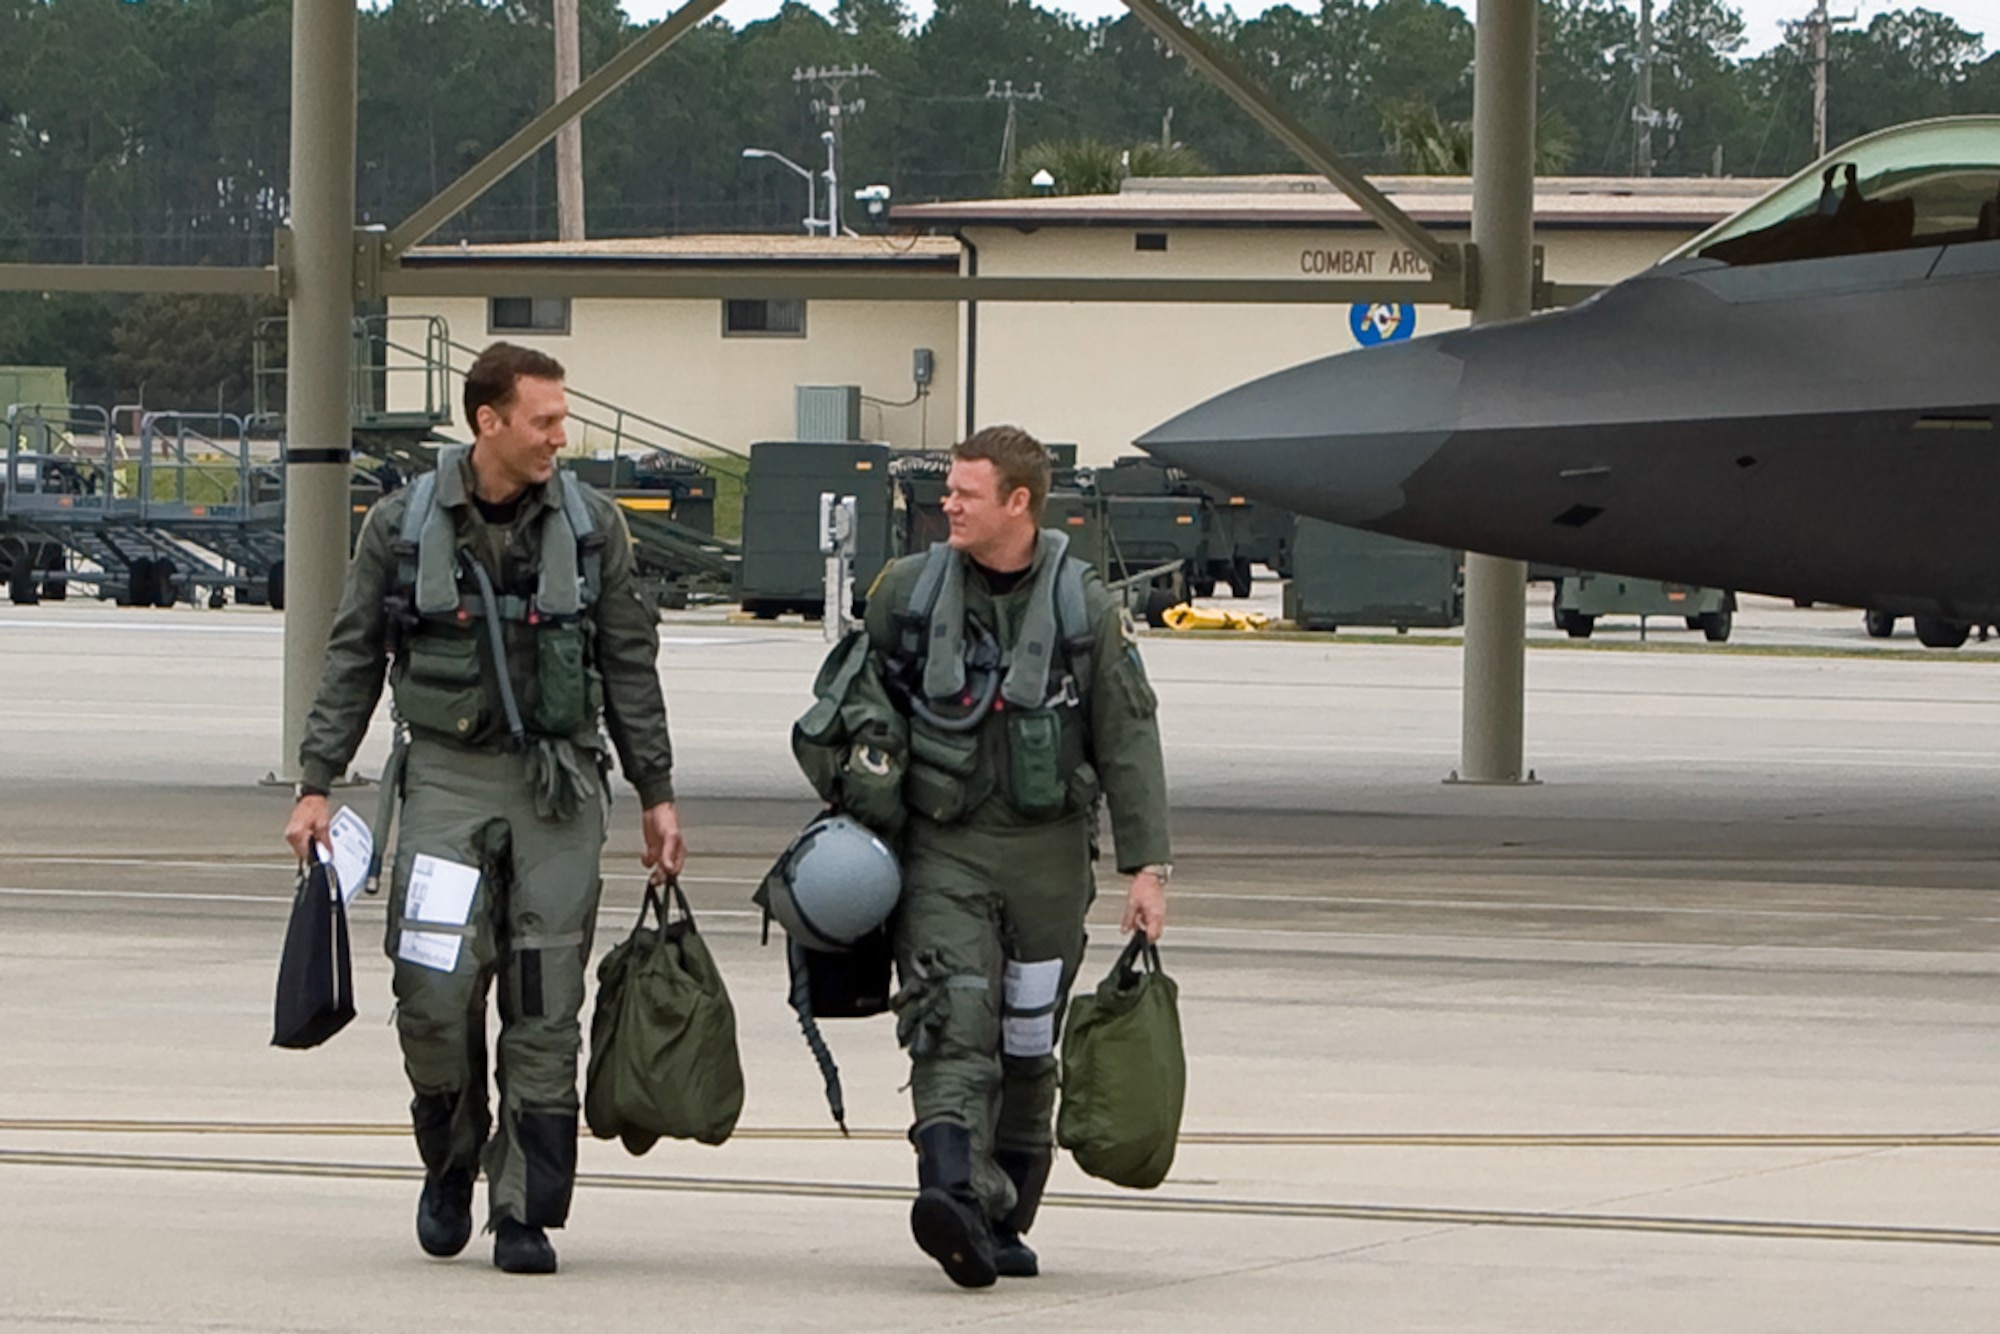 TYNDALL AIR FORCE BASE, Fla. -- Maj. David Pifferario, 302nd Fighter Squadron F-22 pilot, and Capt. Ryan Pelkola, a 90th FS pilot, step to their Raptors. The 3rd Wing and Air Force Reserve Command's 477th Fighter Group combined for its first F-22A Raptor deployment to Tyndall Air Force Base, Fla., for Combat Archer. The successful integration of both reserve and active-duty Airmen was showcased Feb. 2-17, when approximately eight aircraft and 132 Airmen took part in the Weapons System Evaluation Program training. Combat Archer is an assessment conducted to prepare and evaluate operational fighter squadron's readiness for combat operations. (Photo by Scott Wolfe)